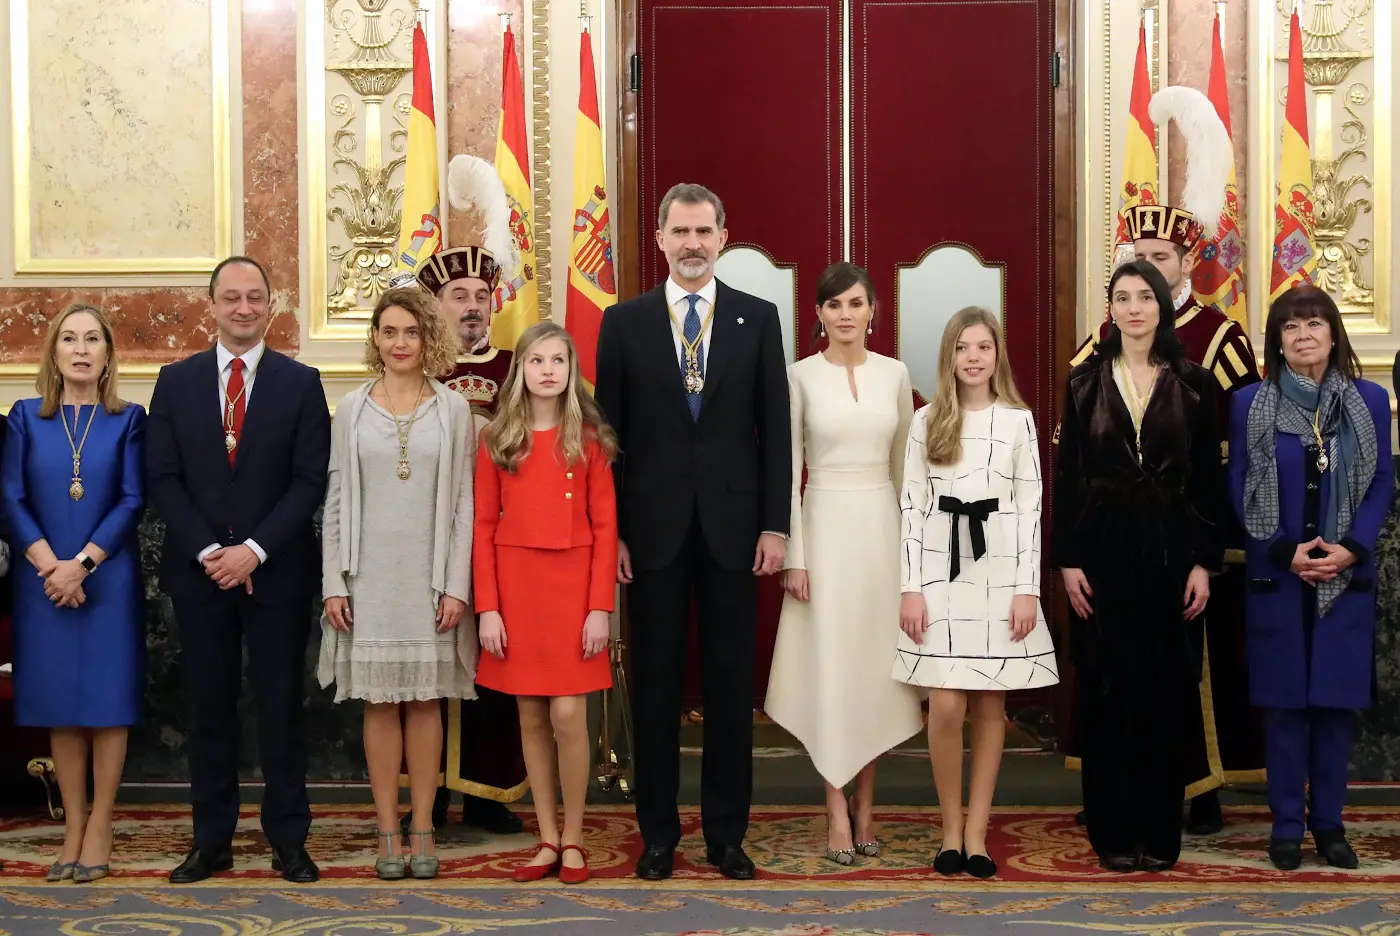 King Felipe and Queen Letizia attended the opening of the Legislature with Princess Leonor and Infanta Sofia 